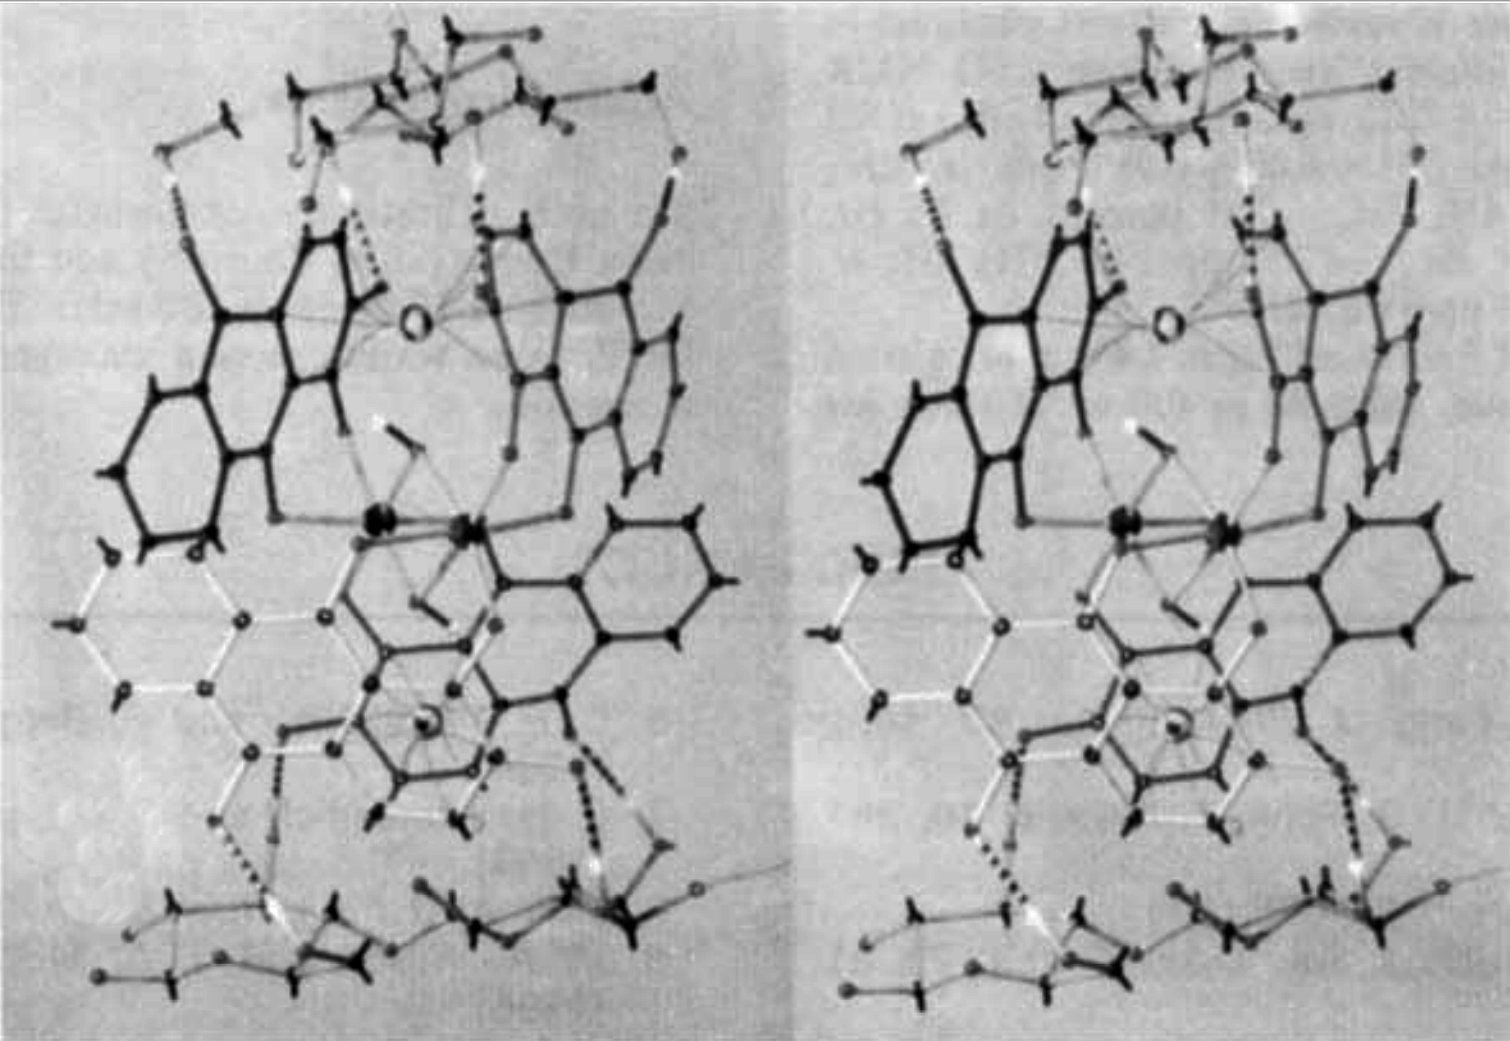 Description: Stereoscopic view of a closed alizarin tetrahydrate complex binding with two cellubiose units